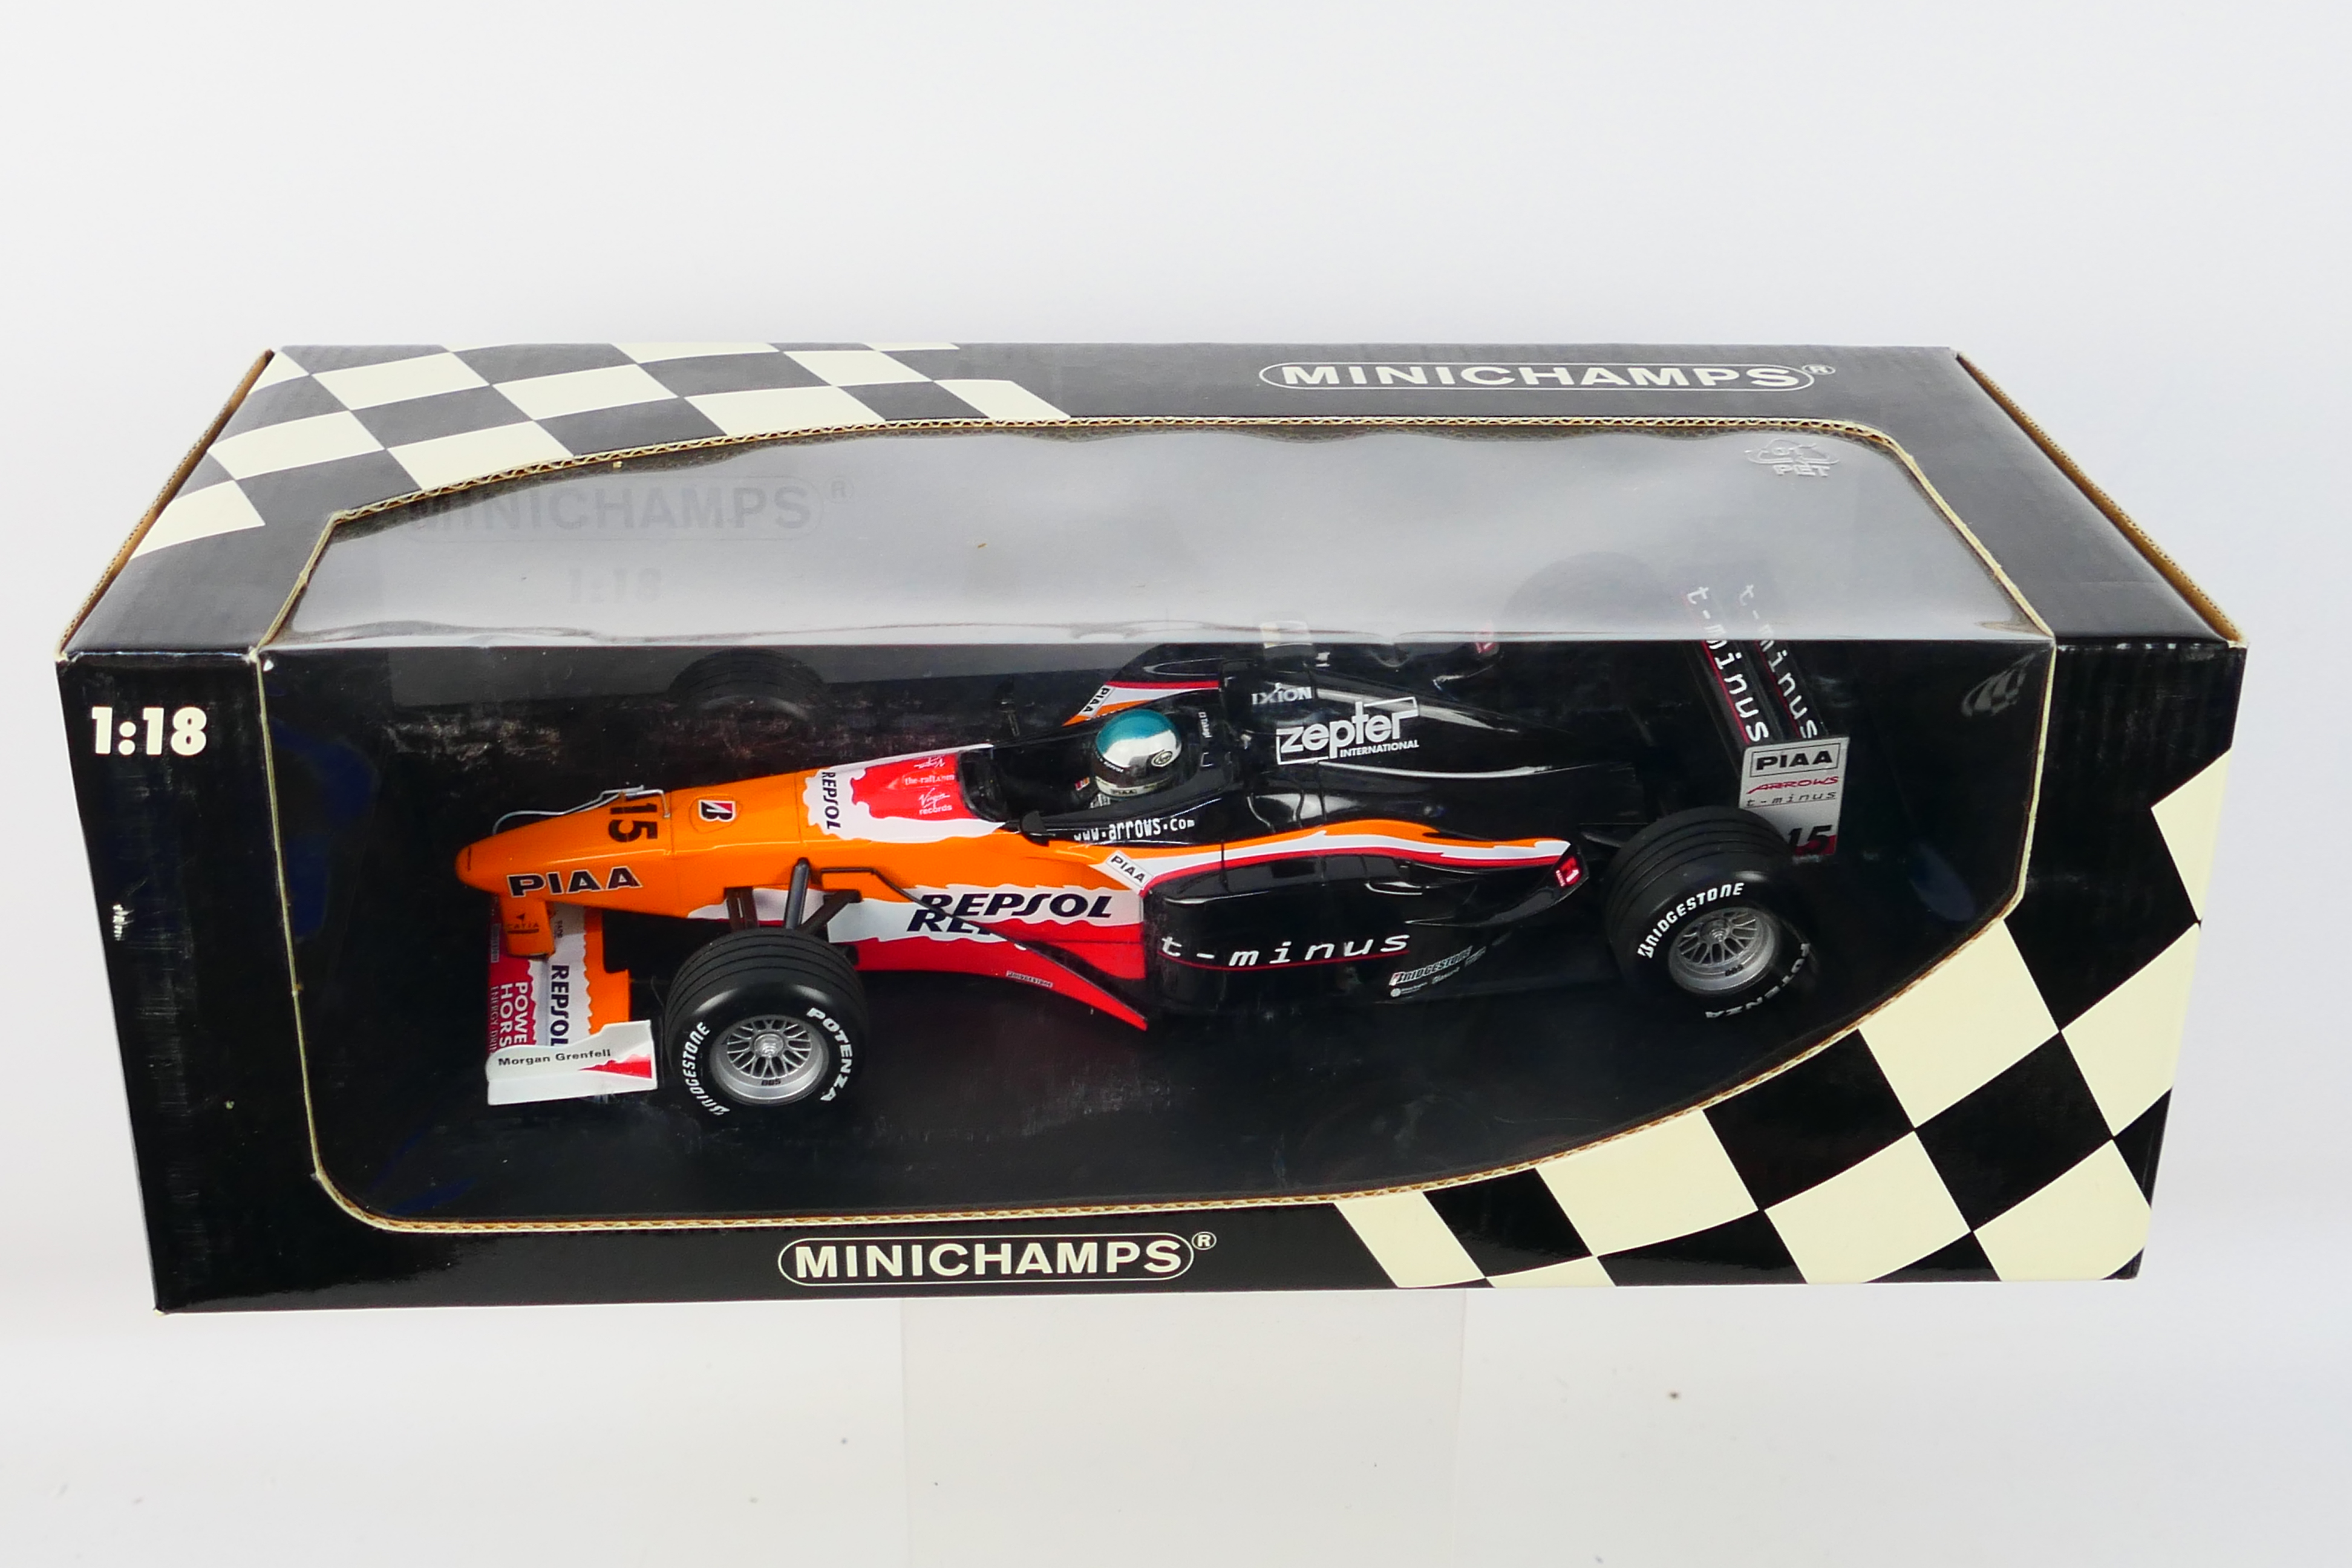 Minichamps- A boxed 1:18 scale Arrows A20 Toranosuke Takagi 1999 car which appears Mint in a Good - Image 3 of 3